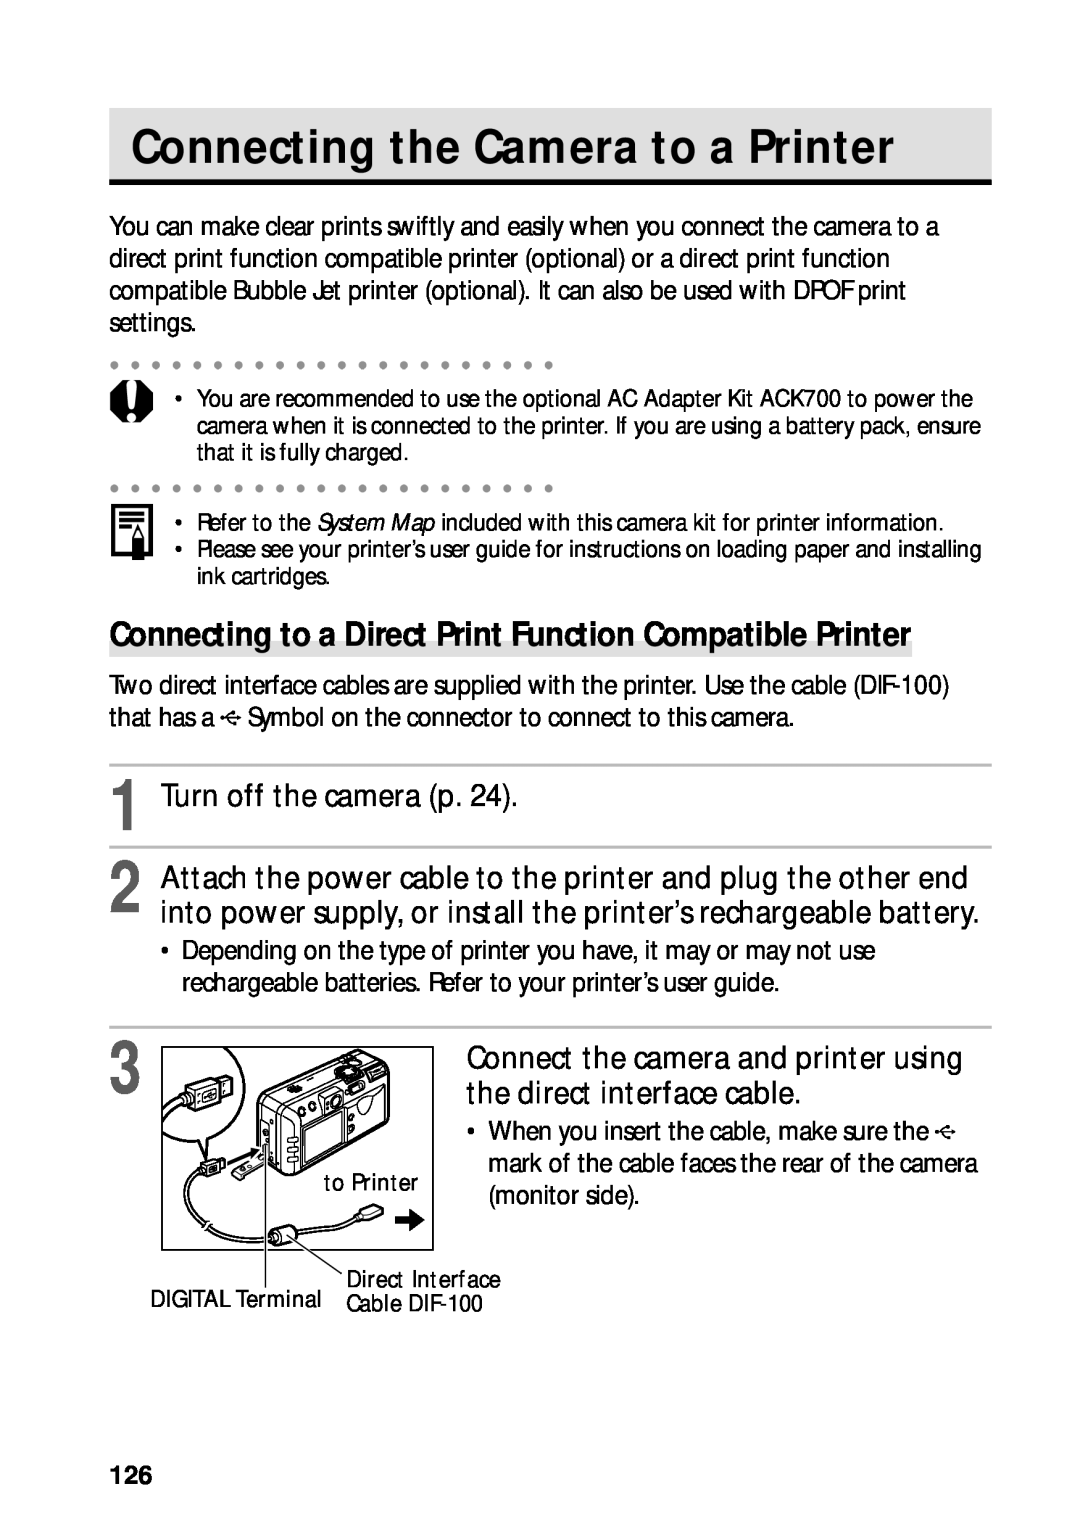 Canon PowerShot S45 manual Connecting the Camera to a Printer, Connecting to a Direct Print Function Compatible Printer 